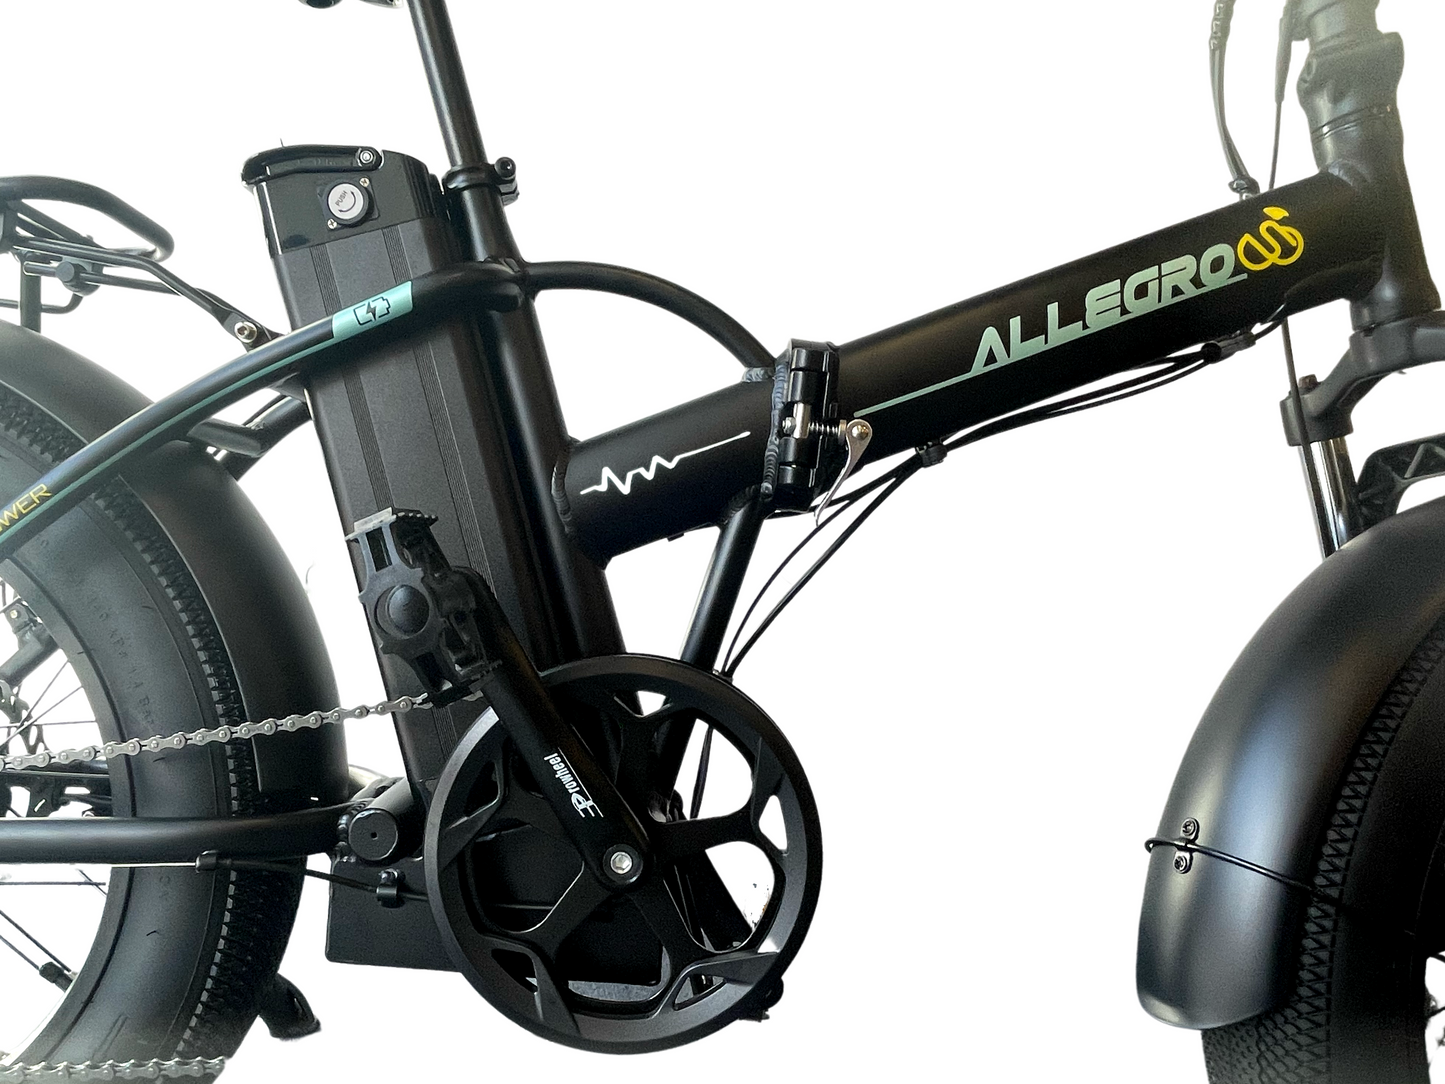 Mid-section of Allegro Electric Bike showing the battery pack and sturdy frame.